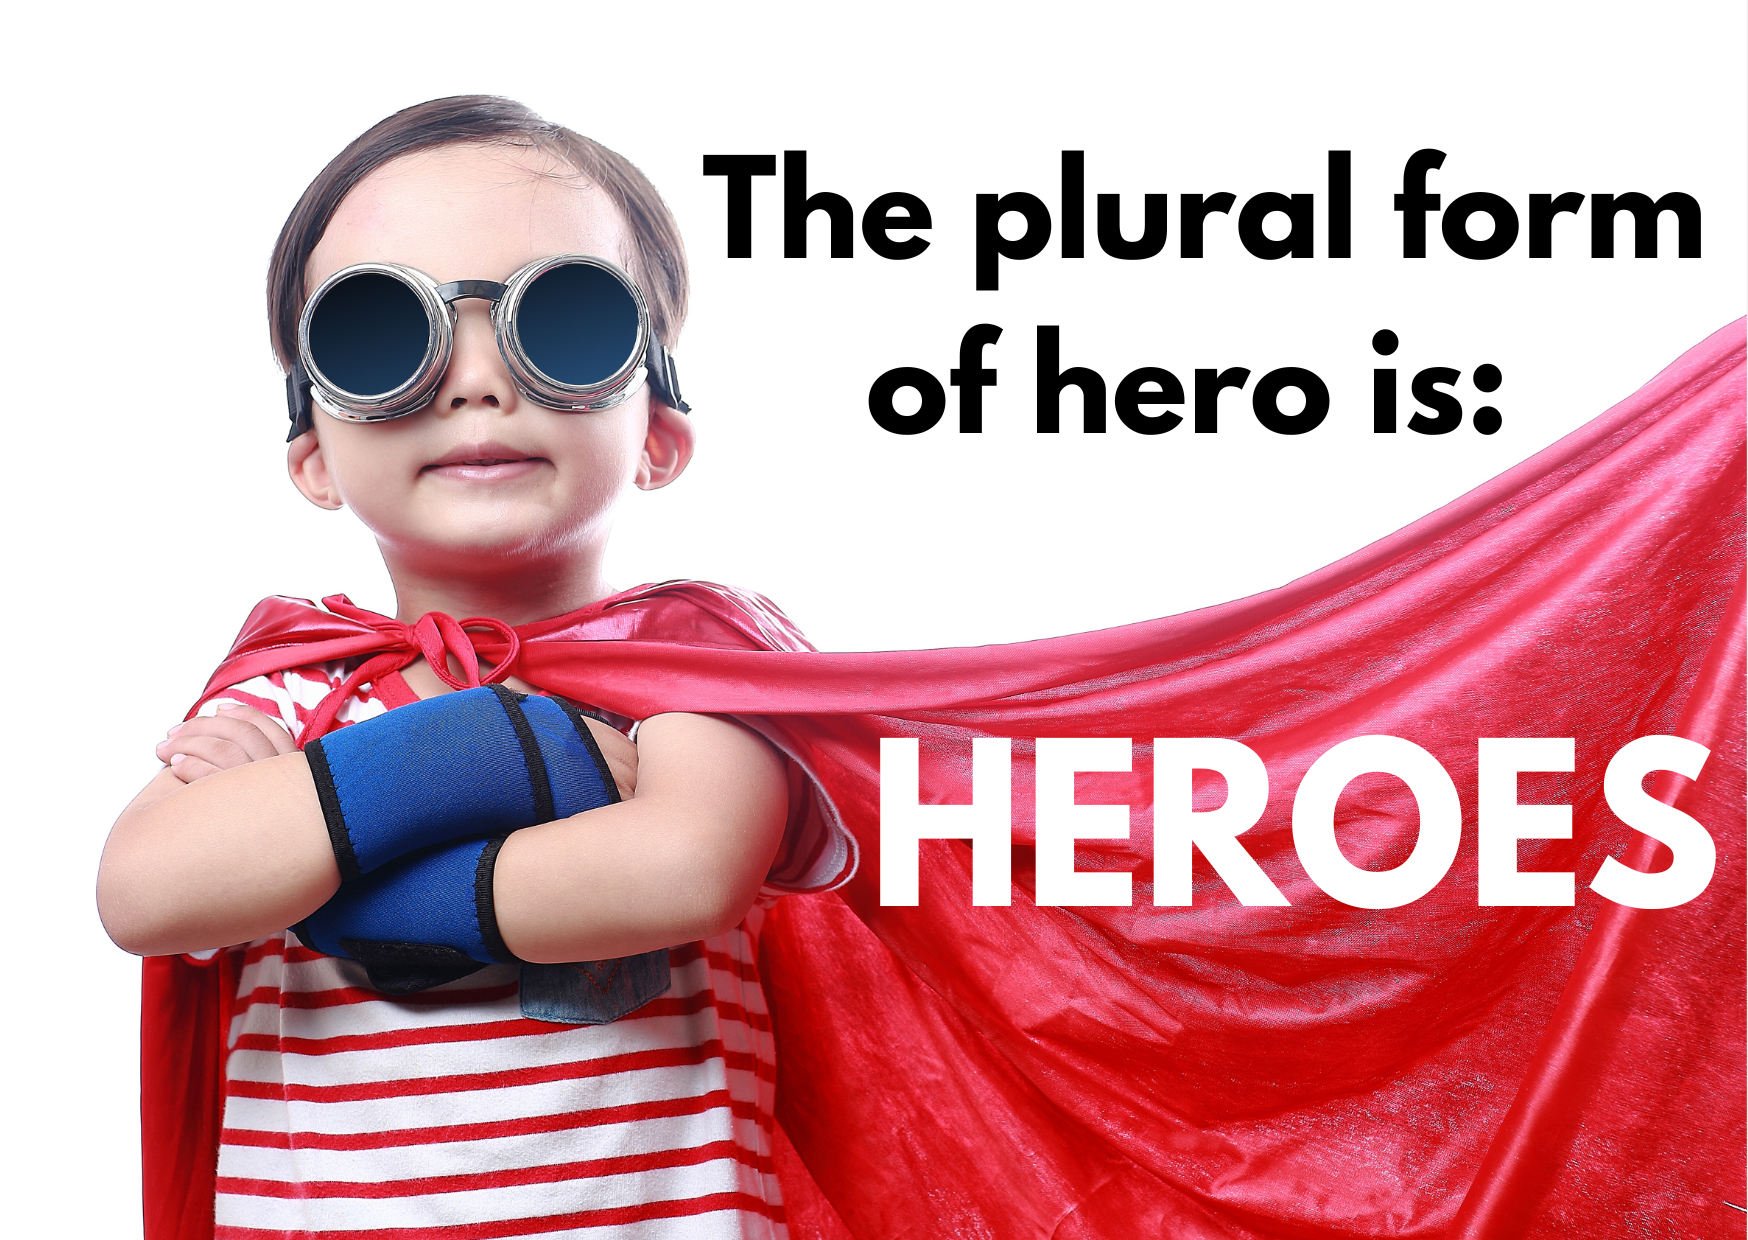 A boy dressed as a superhero with the words: the plural form of hero is HEROES